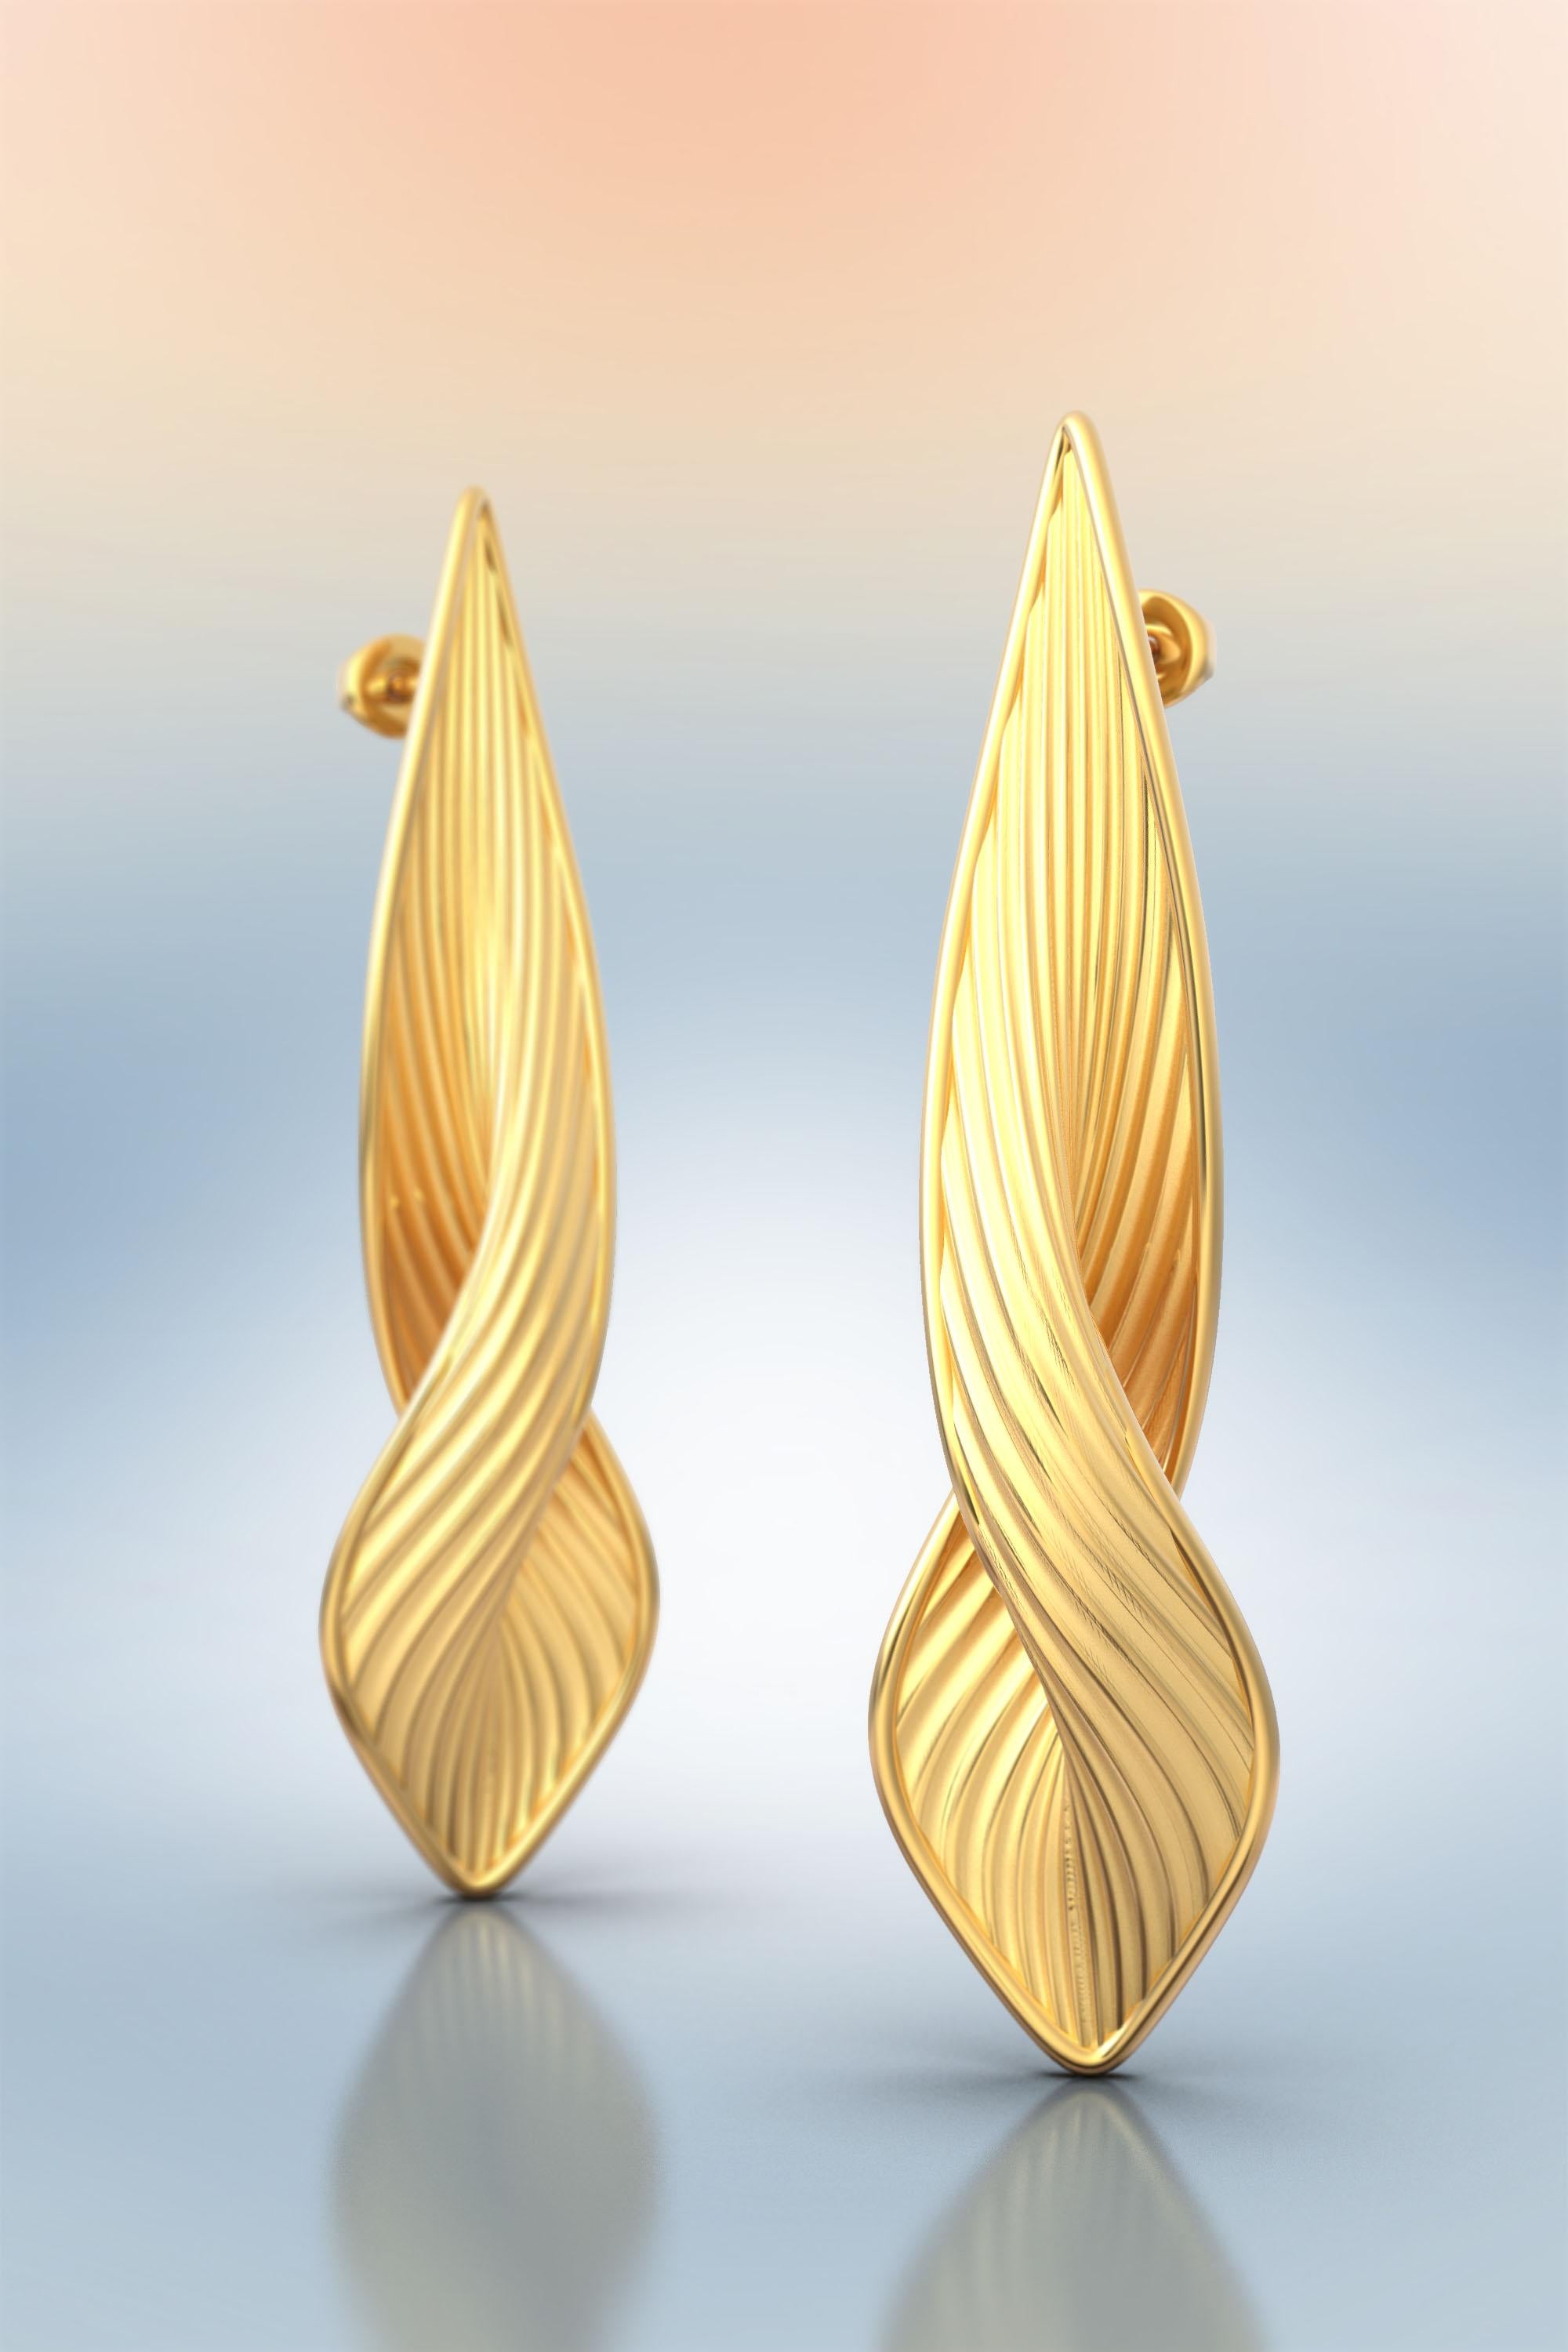 Contemporary Statement Earrings in solid gold 18k,  Italian fine jewelry made in Italy, long stud earring, modern and elegant earrings.
Earring length: 52 Millimeters; Width: 13 Millimeters
Available in yellow gold, rose gold and white gold, 18k or